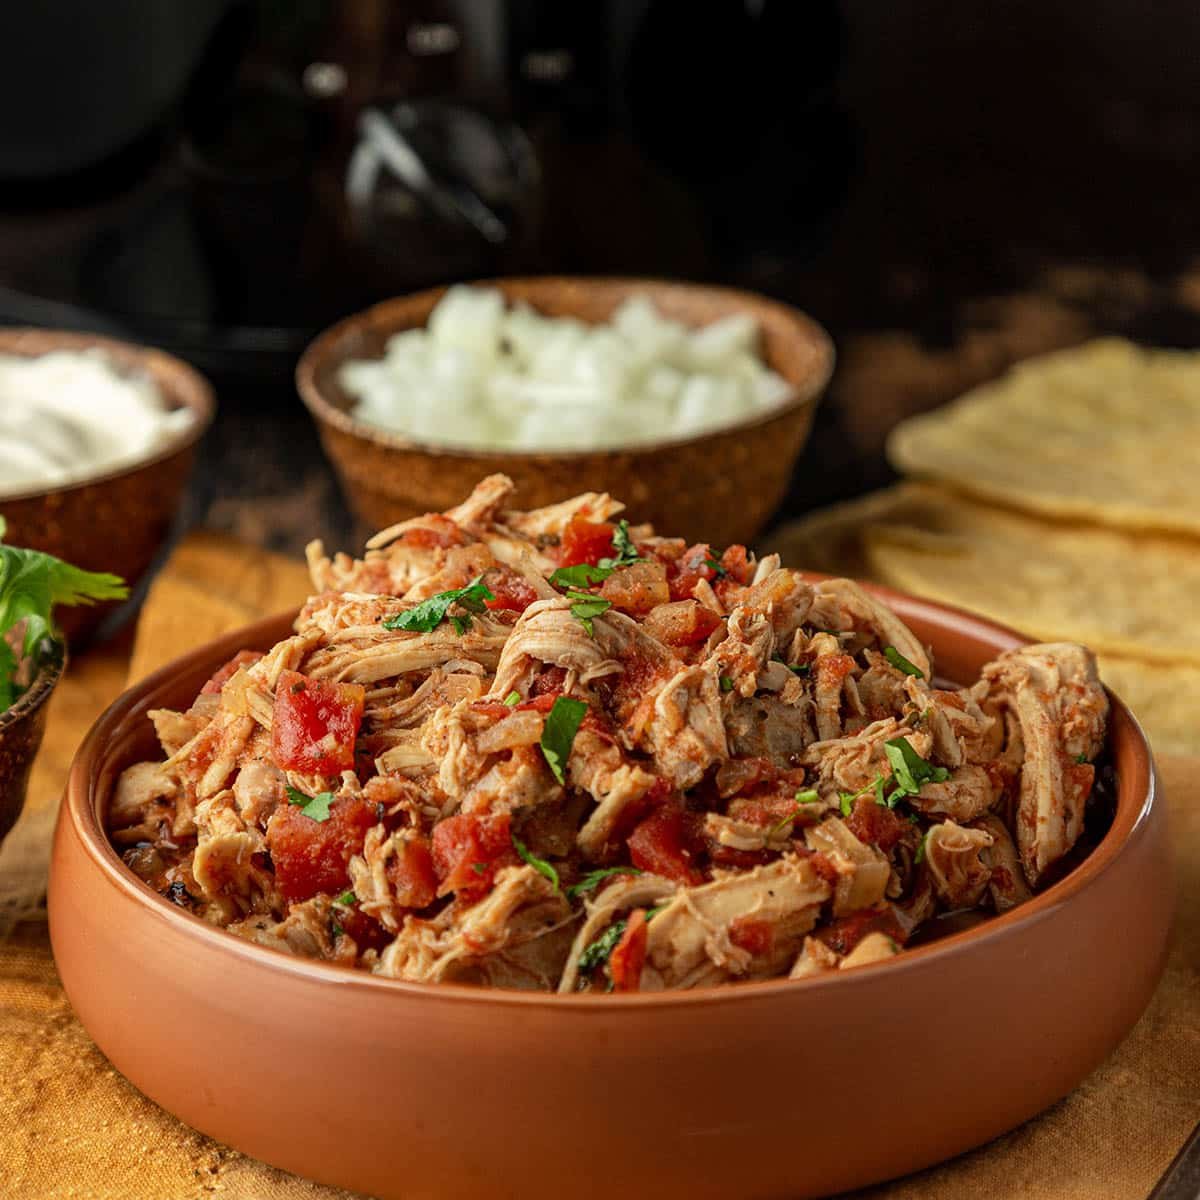 Pulled Chicken with salsa and spices in a terracotta bowl, tortillas and taco fixings around.